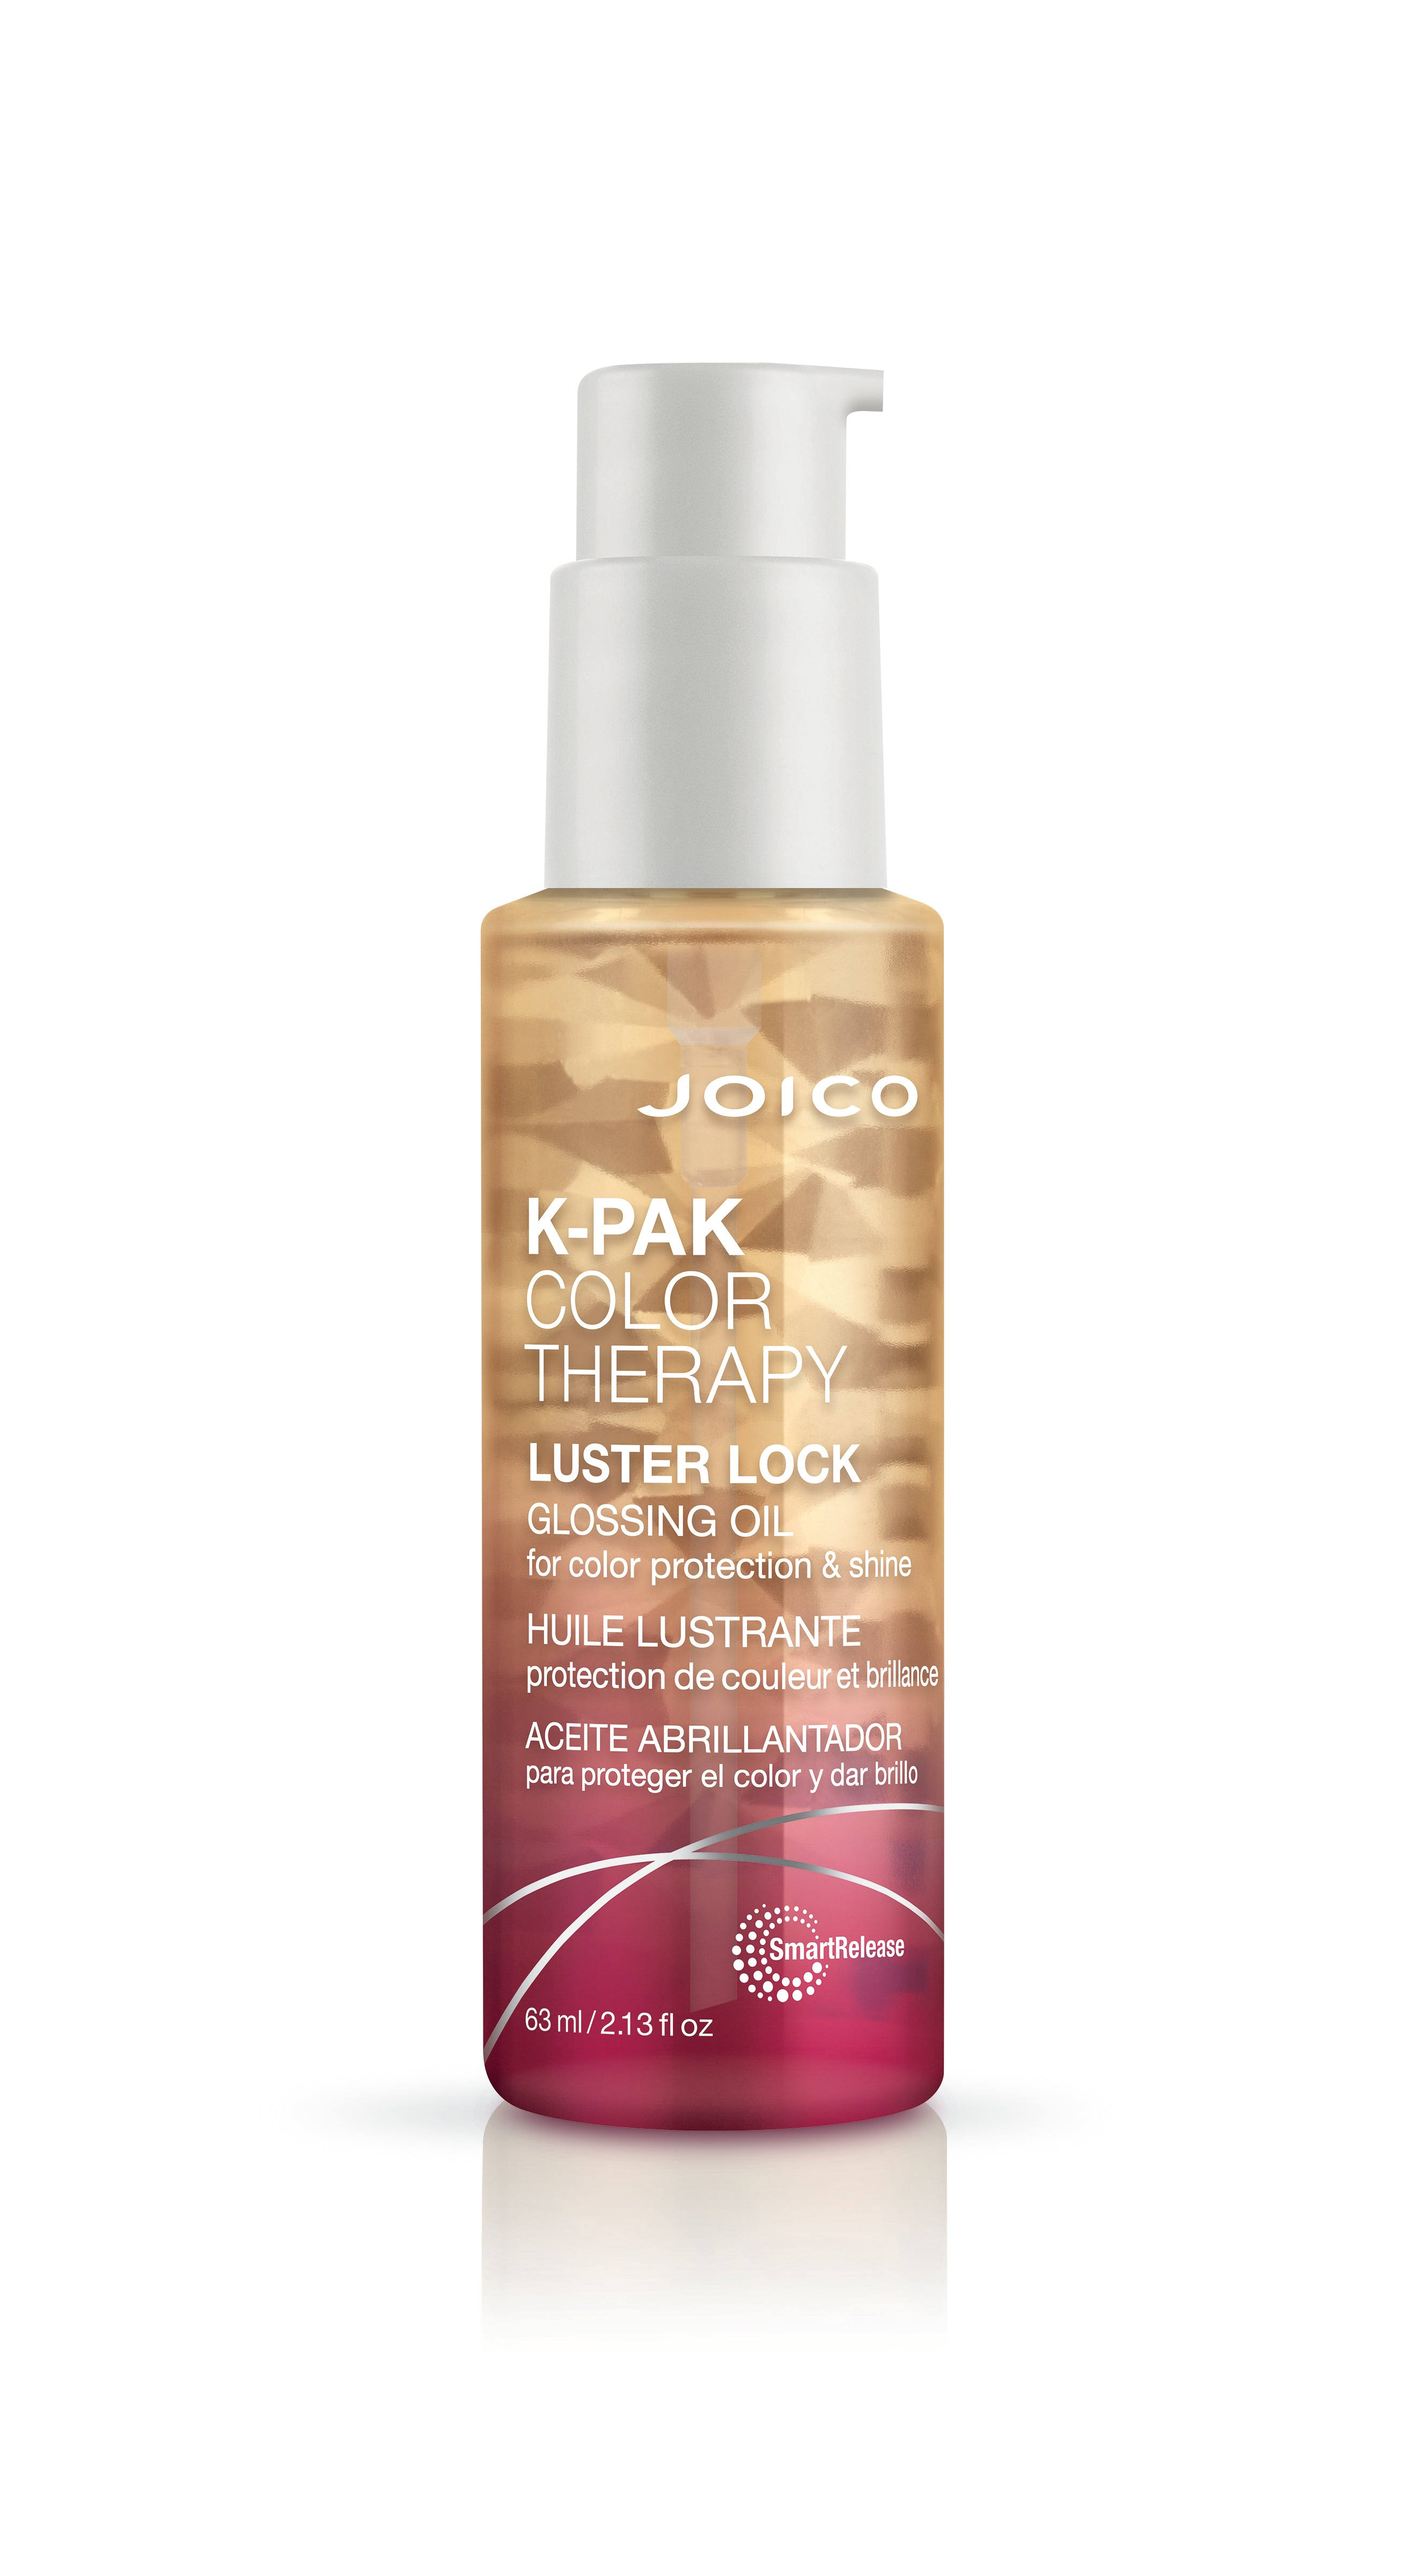 Joico - K-Pak Color Therapy Luster Lock Glossing Oil (63ml)